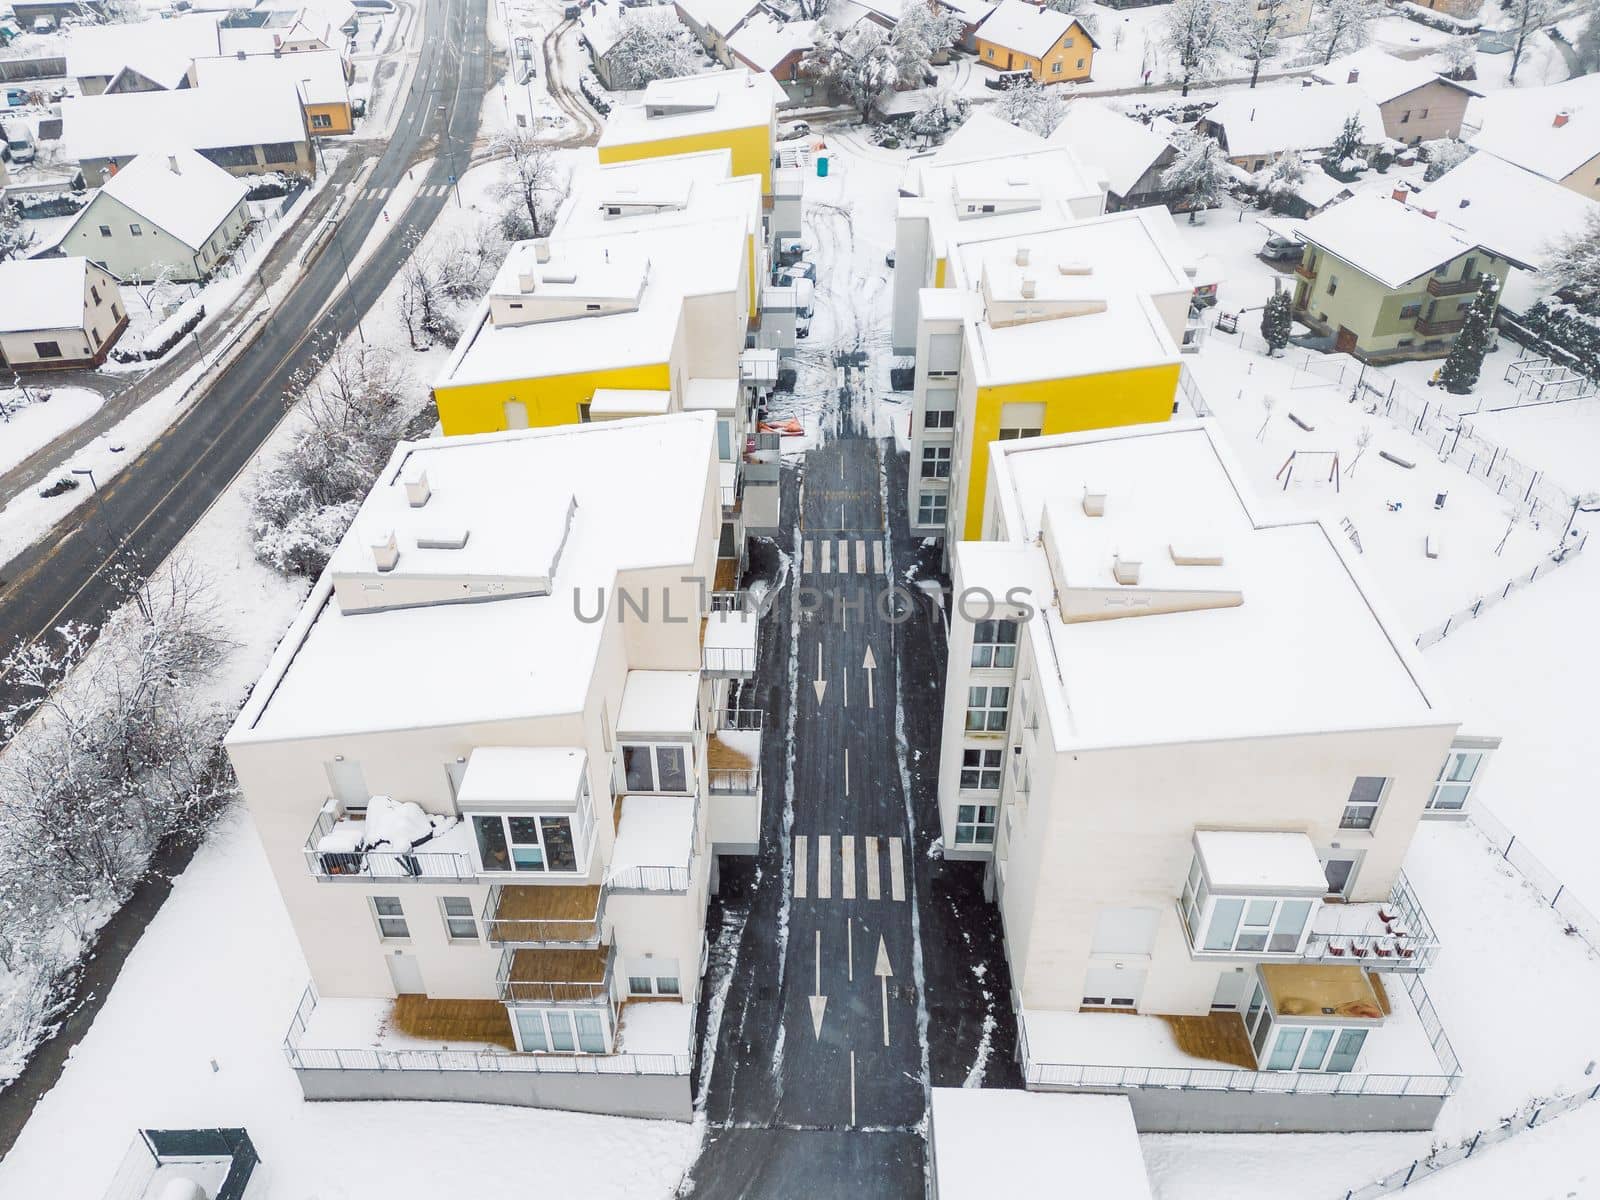 Drone flying over newly build residential buildings with apartments on a snowy winter day by VisualProductions